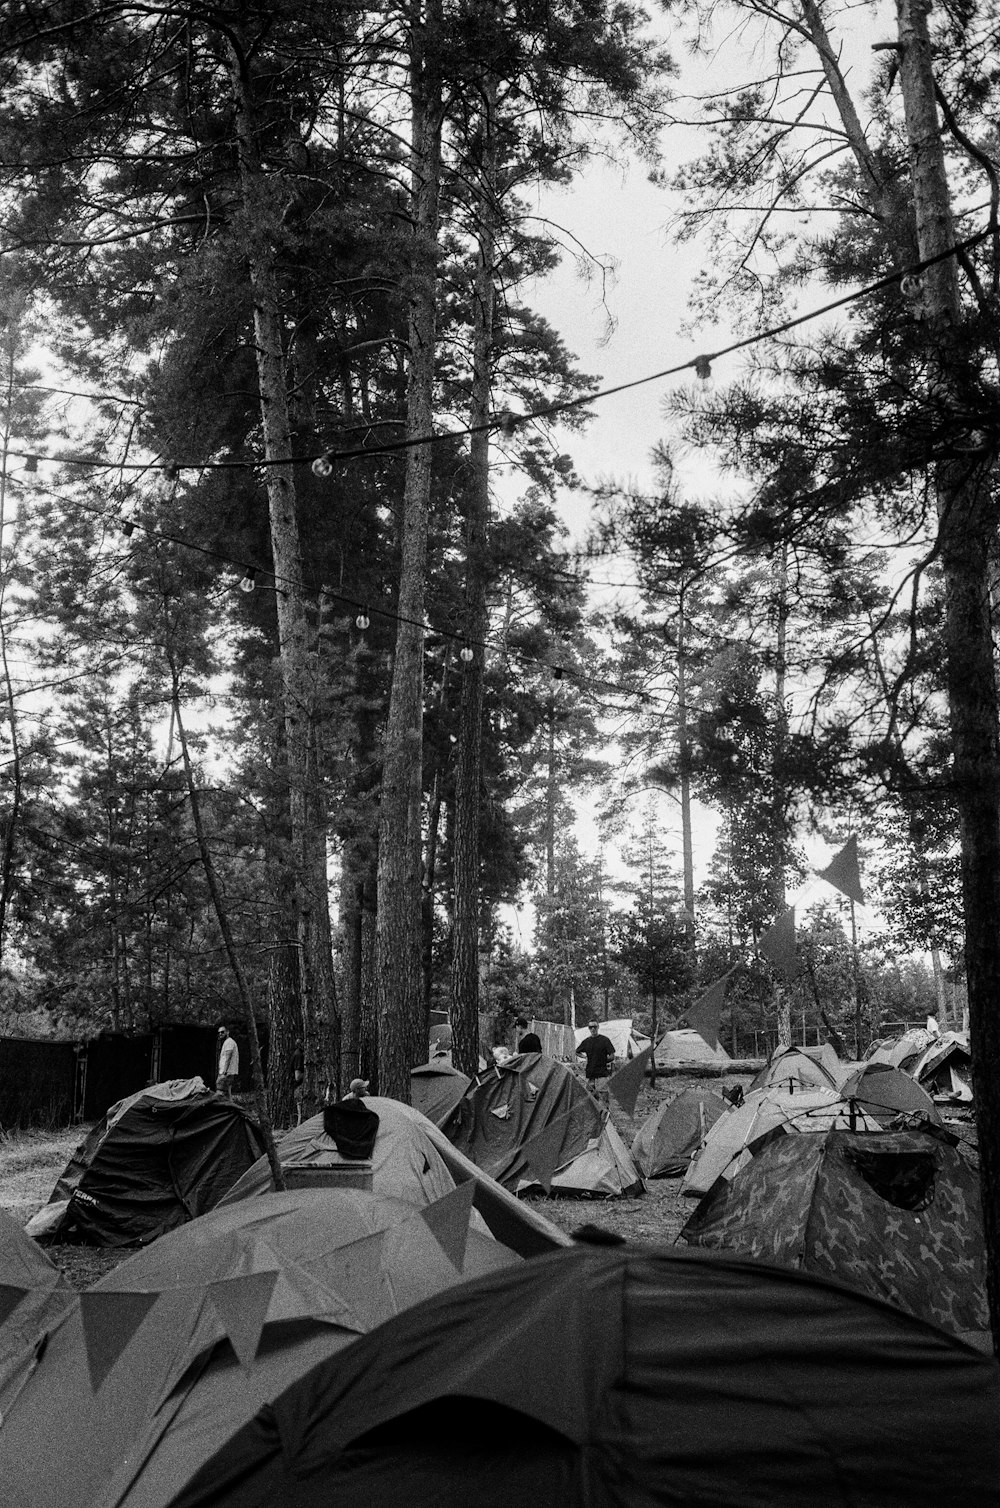 grayscale photo of people sitting on camping chairs in forest